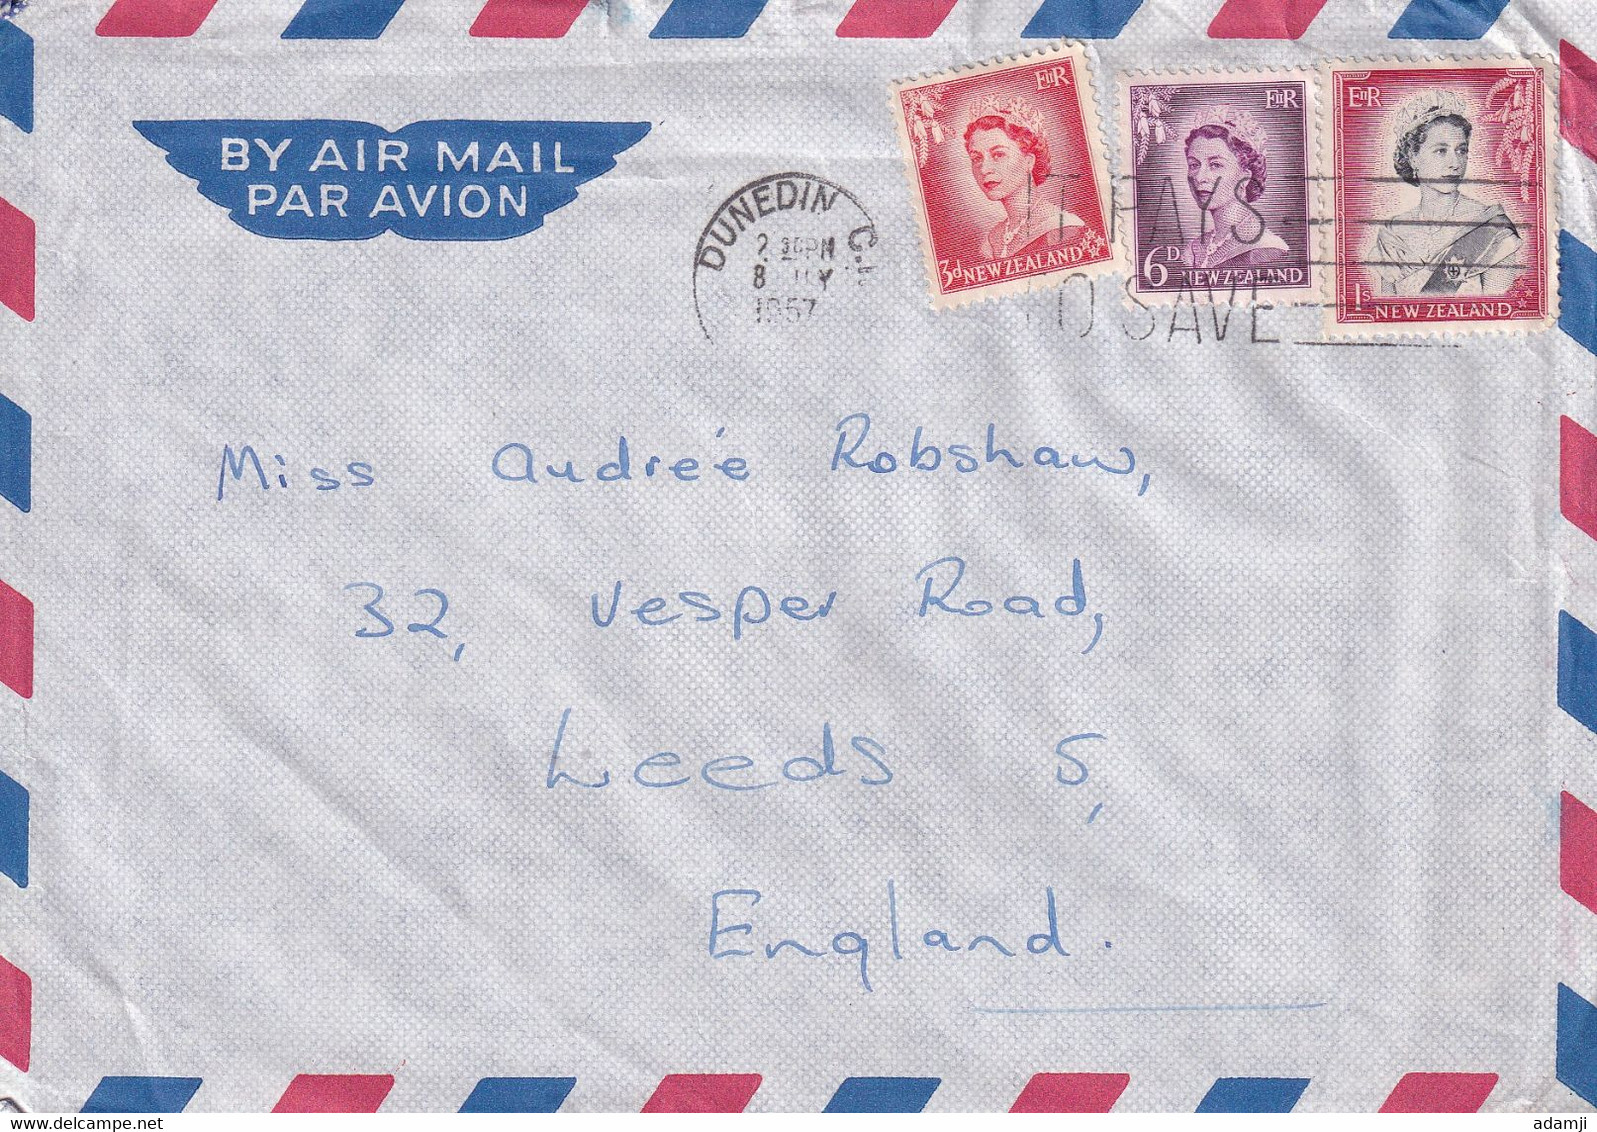 NEW ZEALAND 1957 QE II COVER TO UK. - Covers & Documents